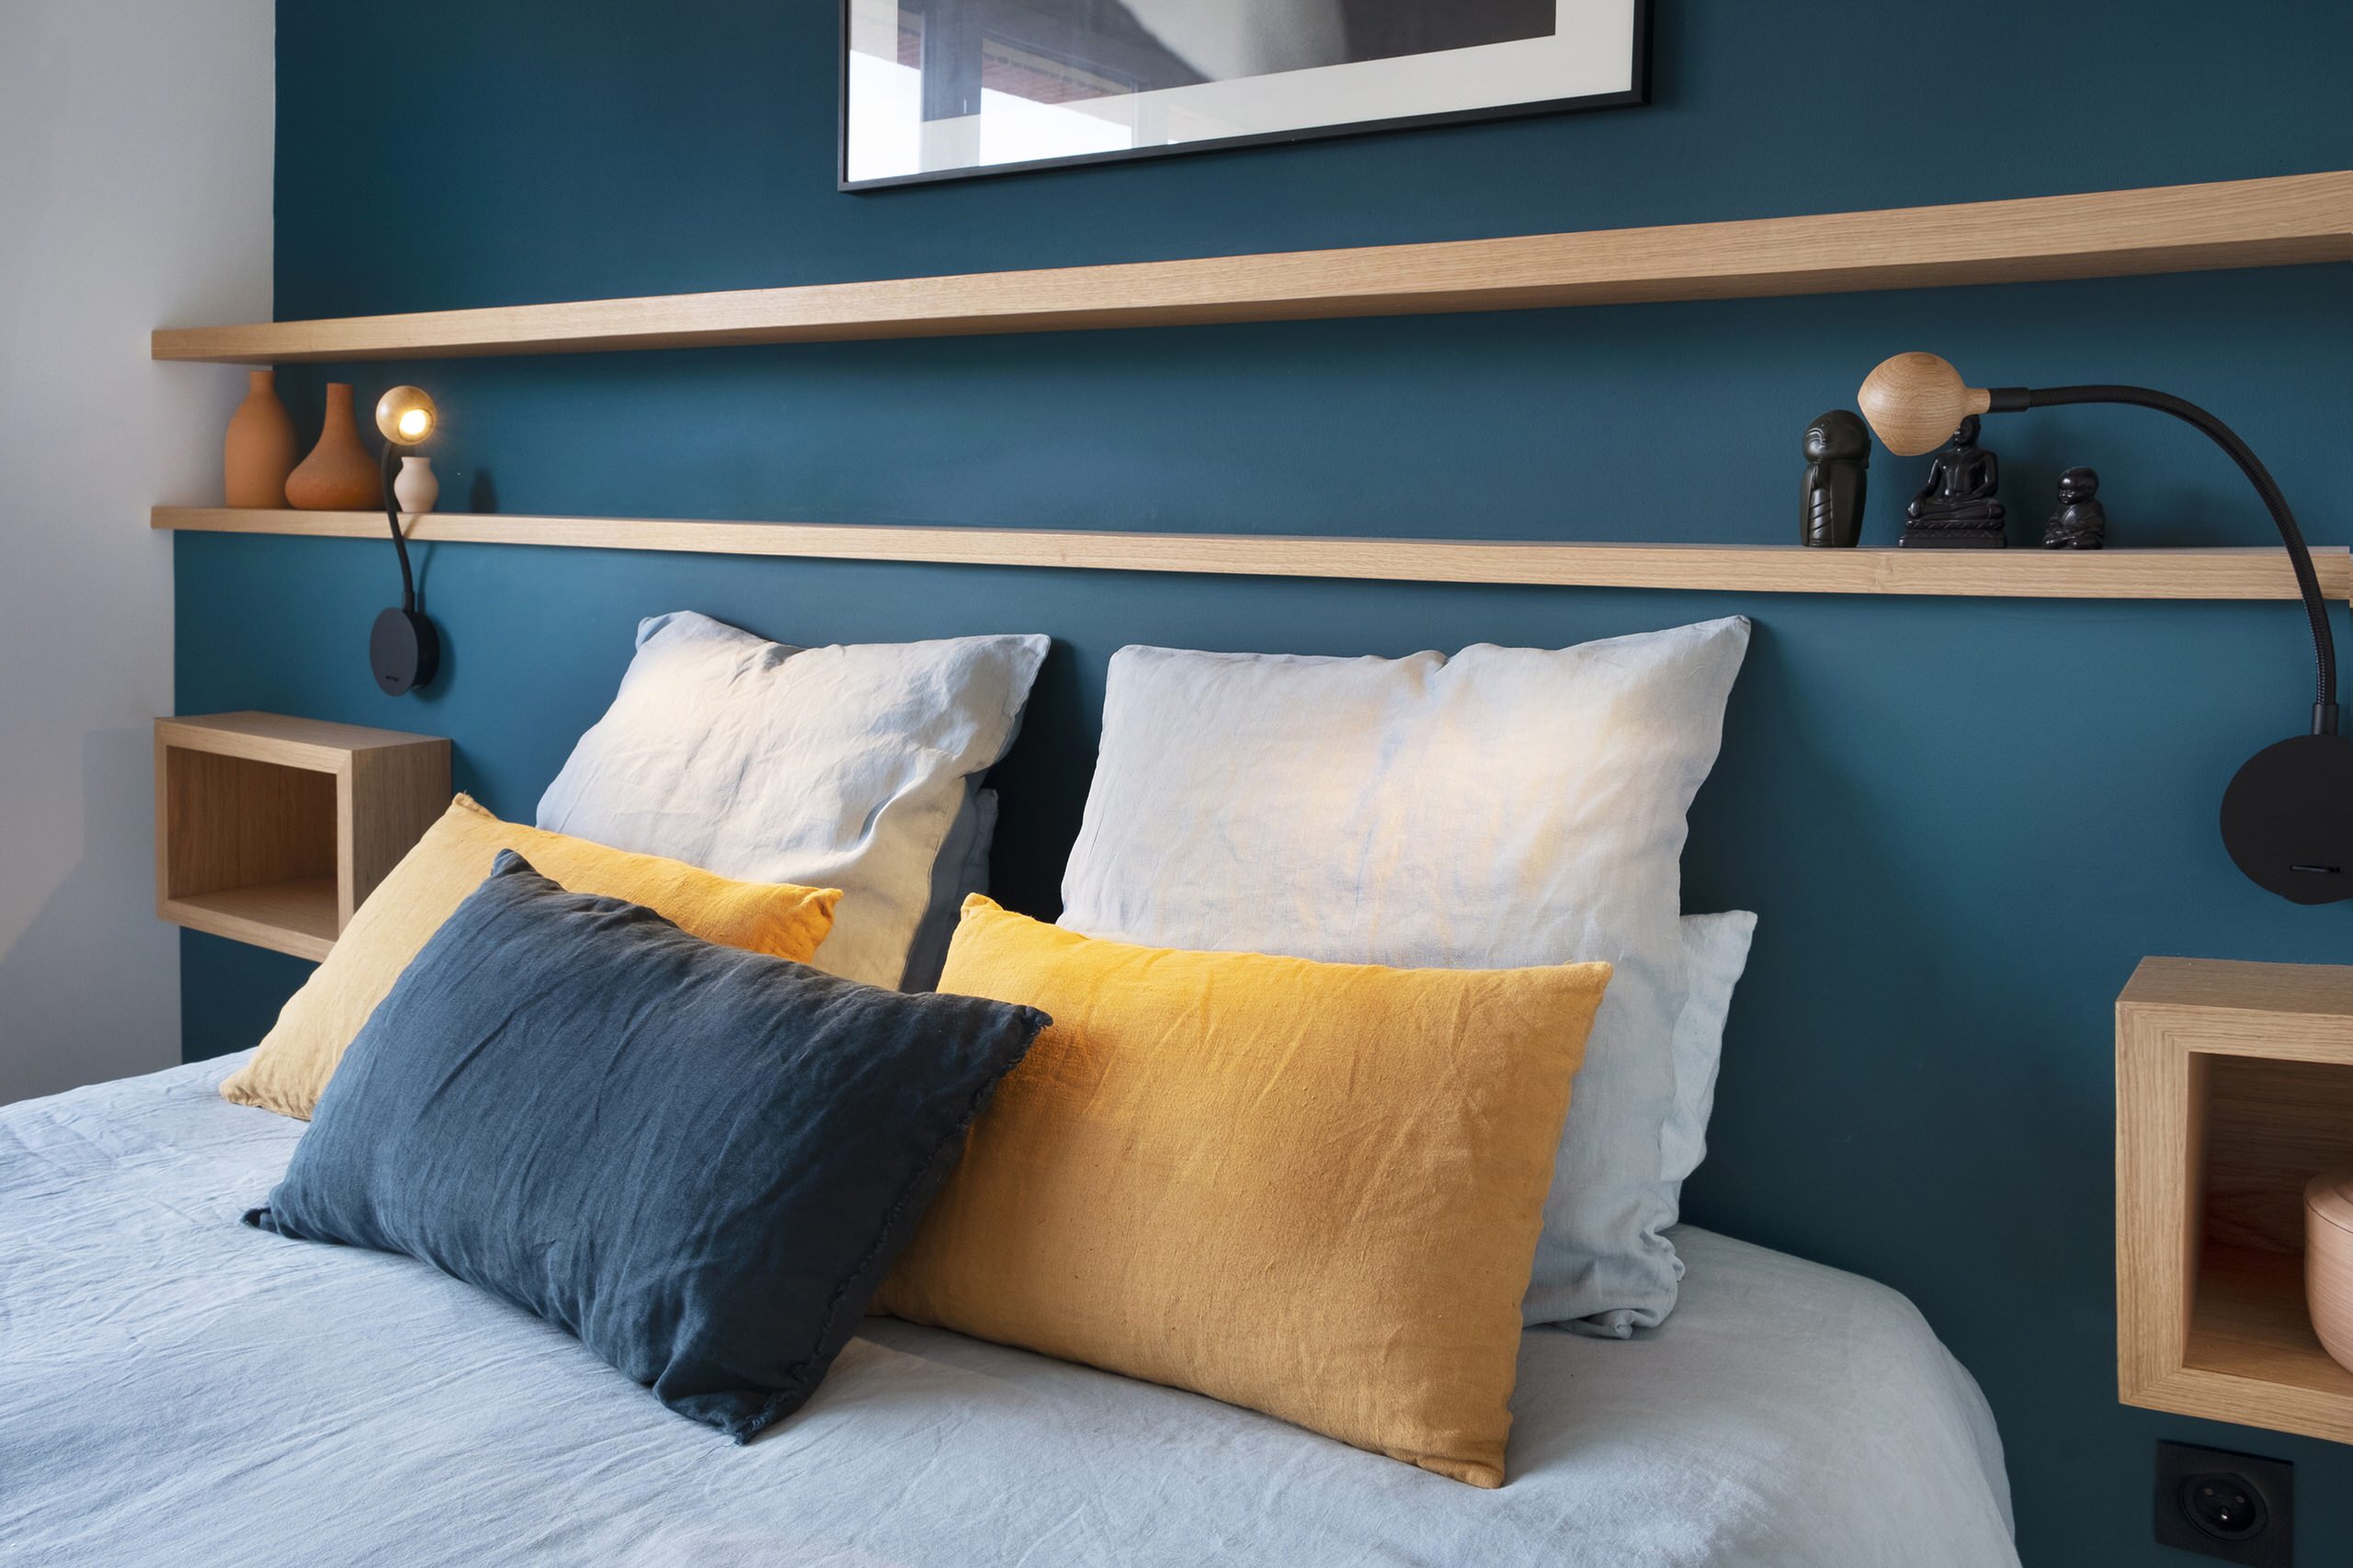 Tête de lit - Contemporary - Bedroom - Toulouse - by Atelier Anagramme |  Houzz